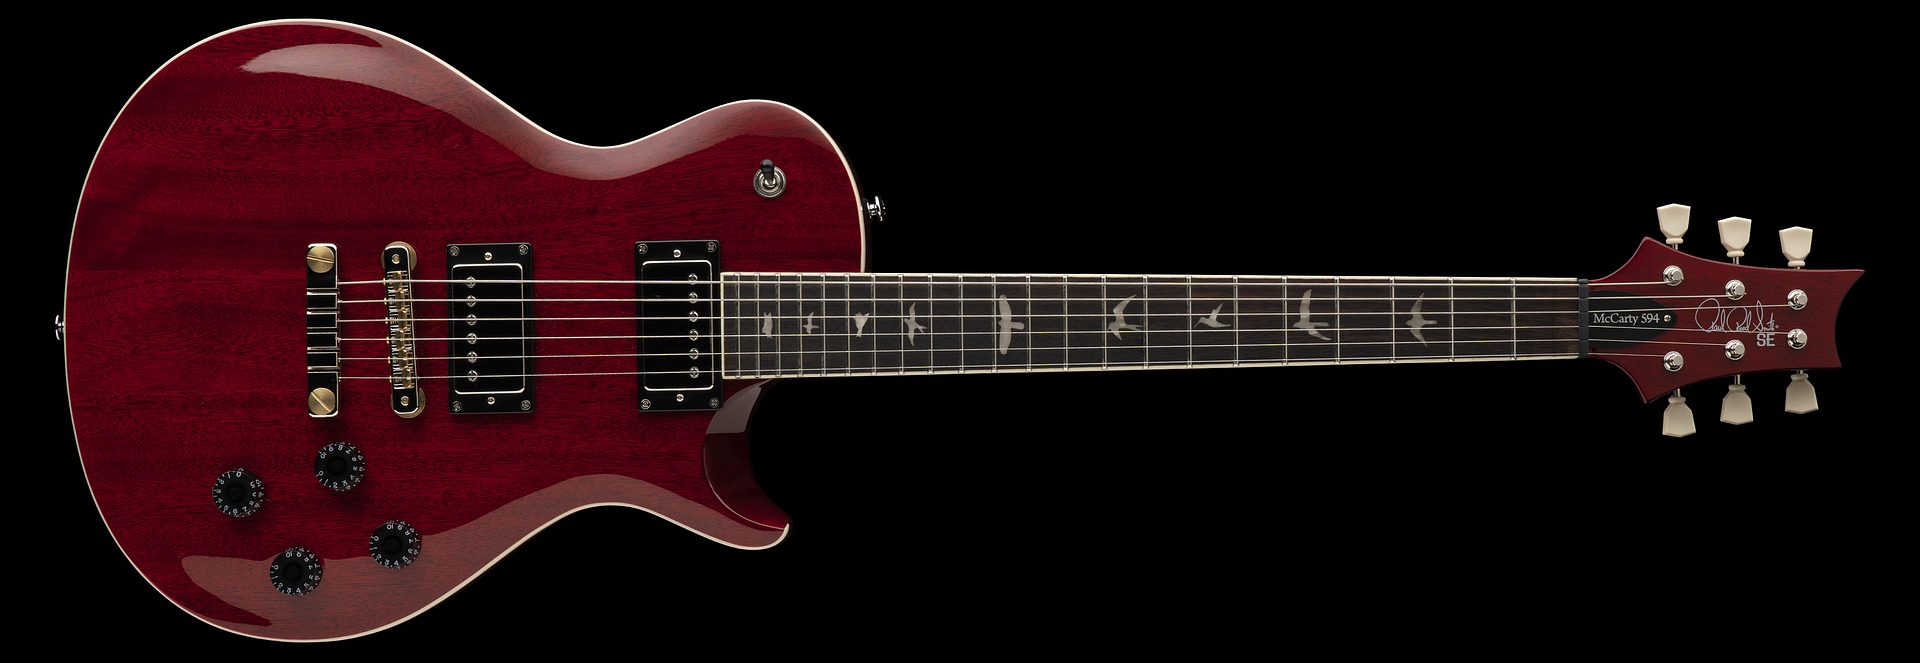 PRS Paul Reed Smith Guitars SE MCCARTY 594 SINGLECUT STANDARD in Vintage Cherry 111387:VC